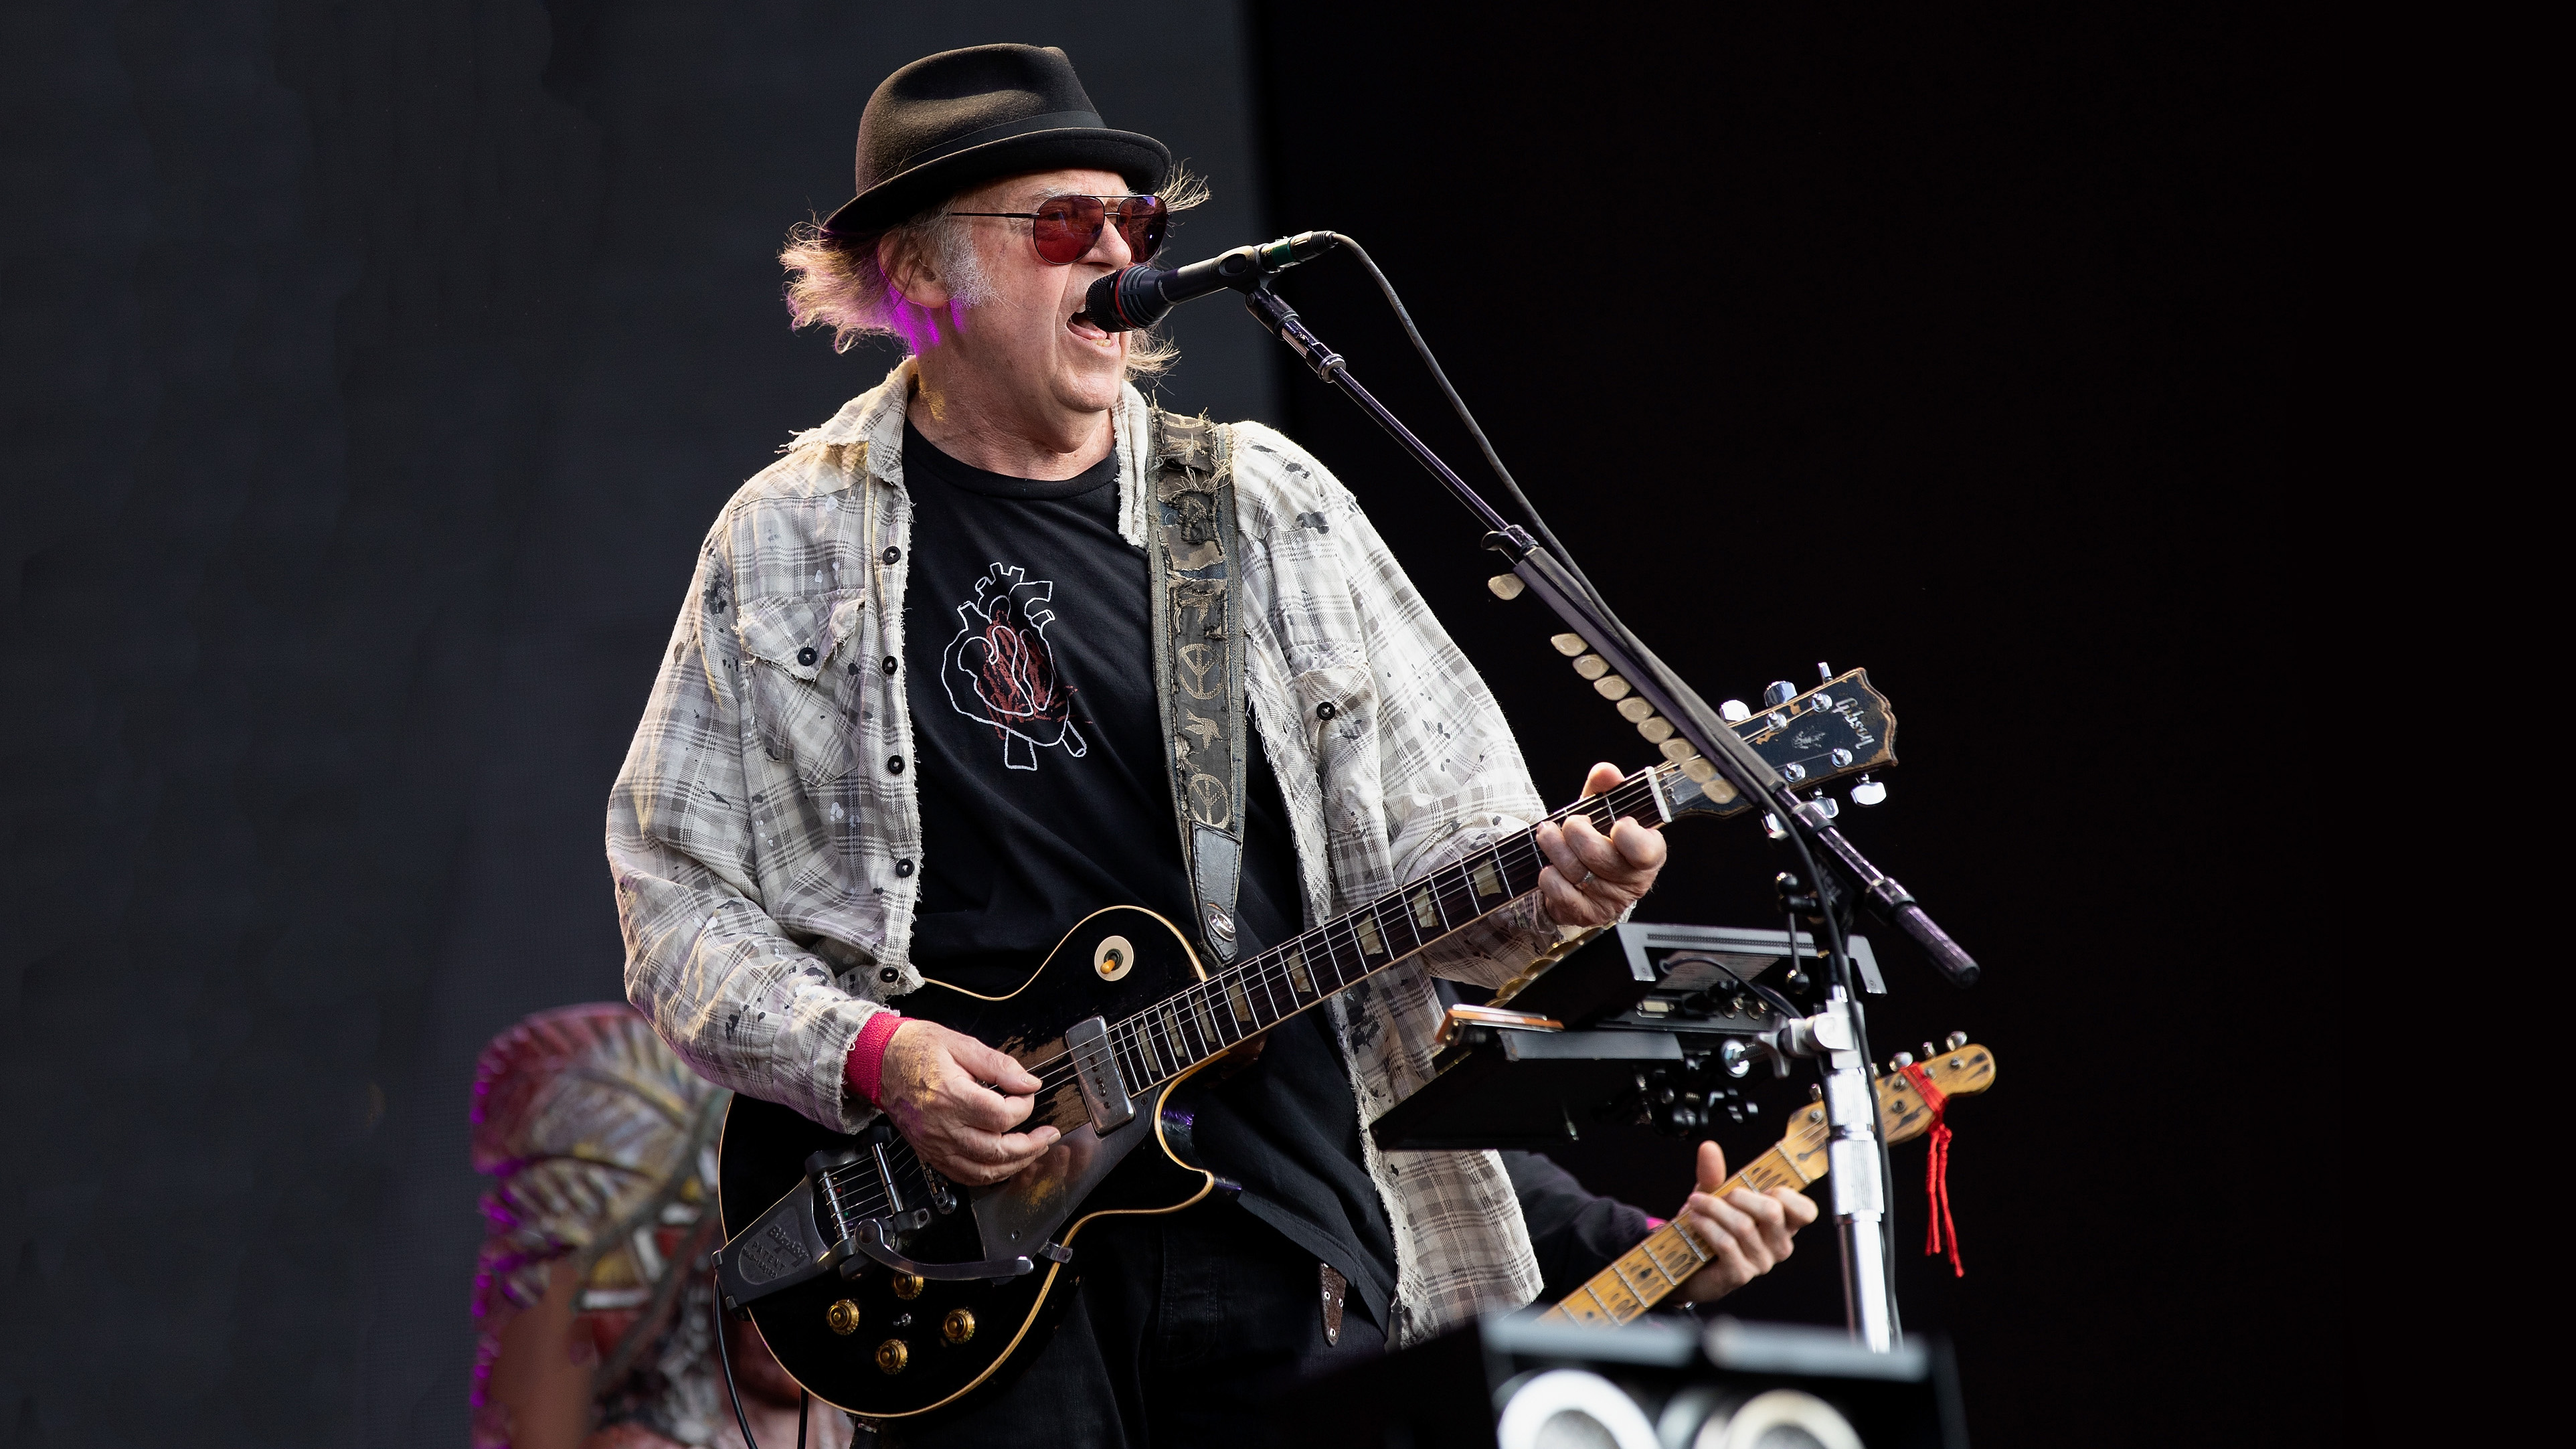 Neil Young – Tell Me Why Lyrics